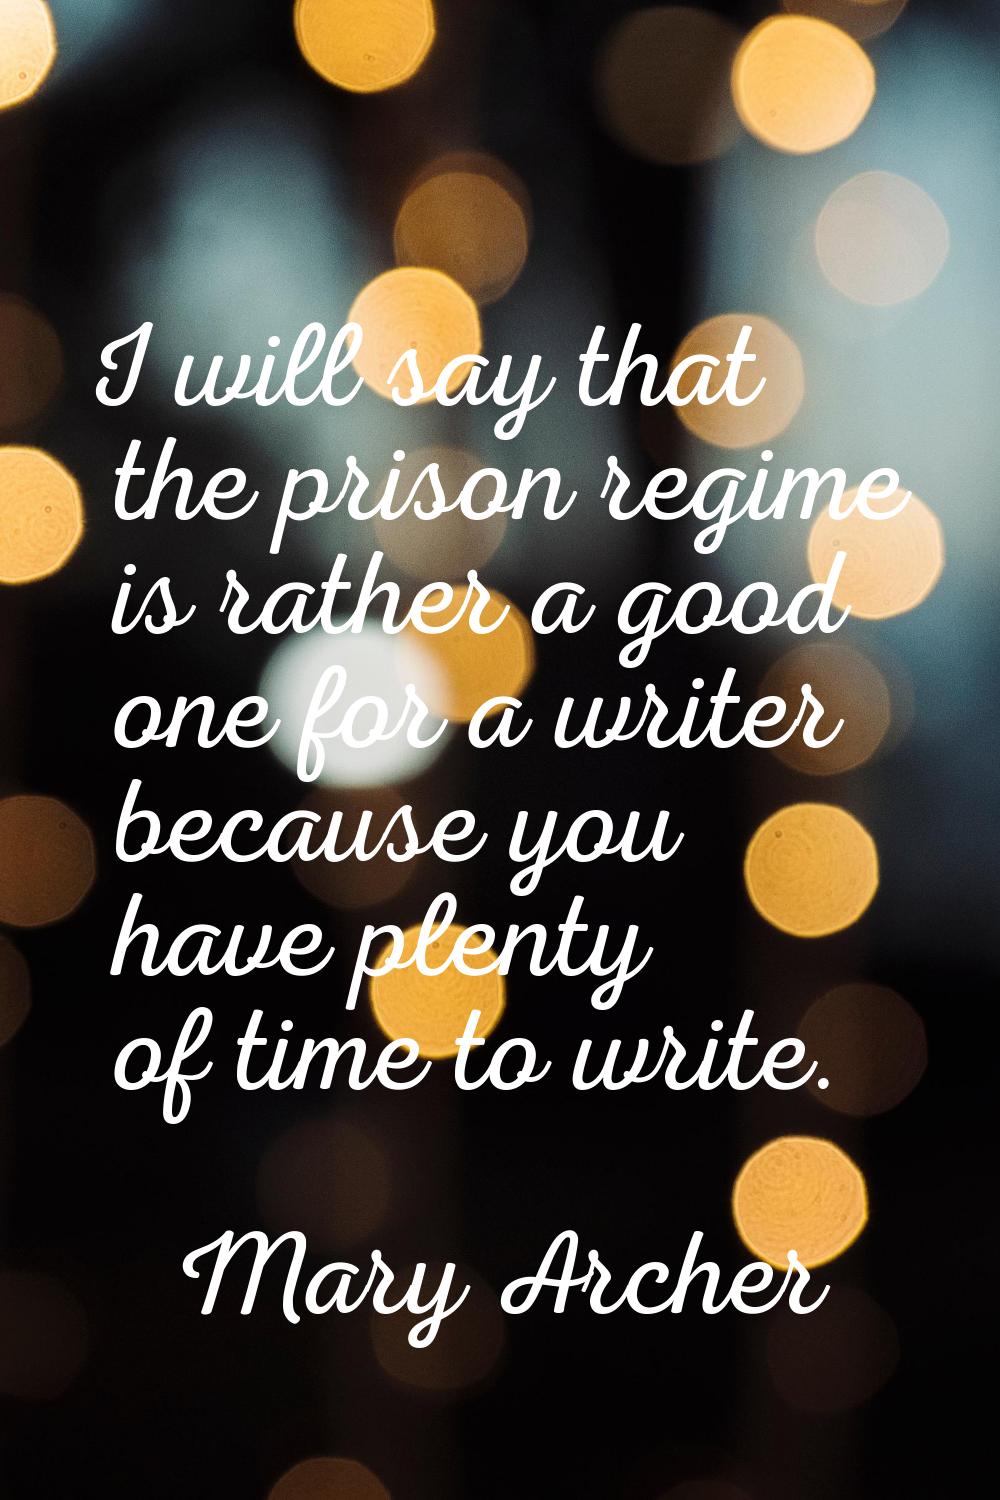 I will say that the prison regime is rather a good one for a writer because you have plenty of time